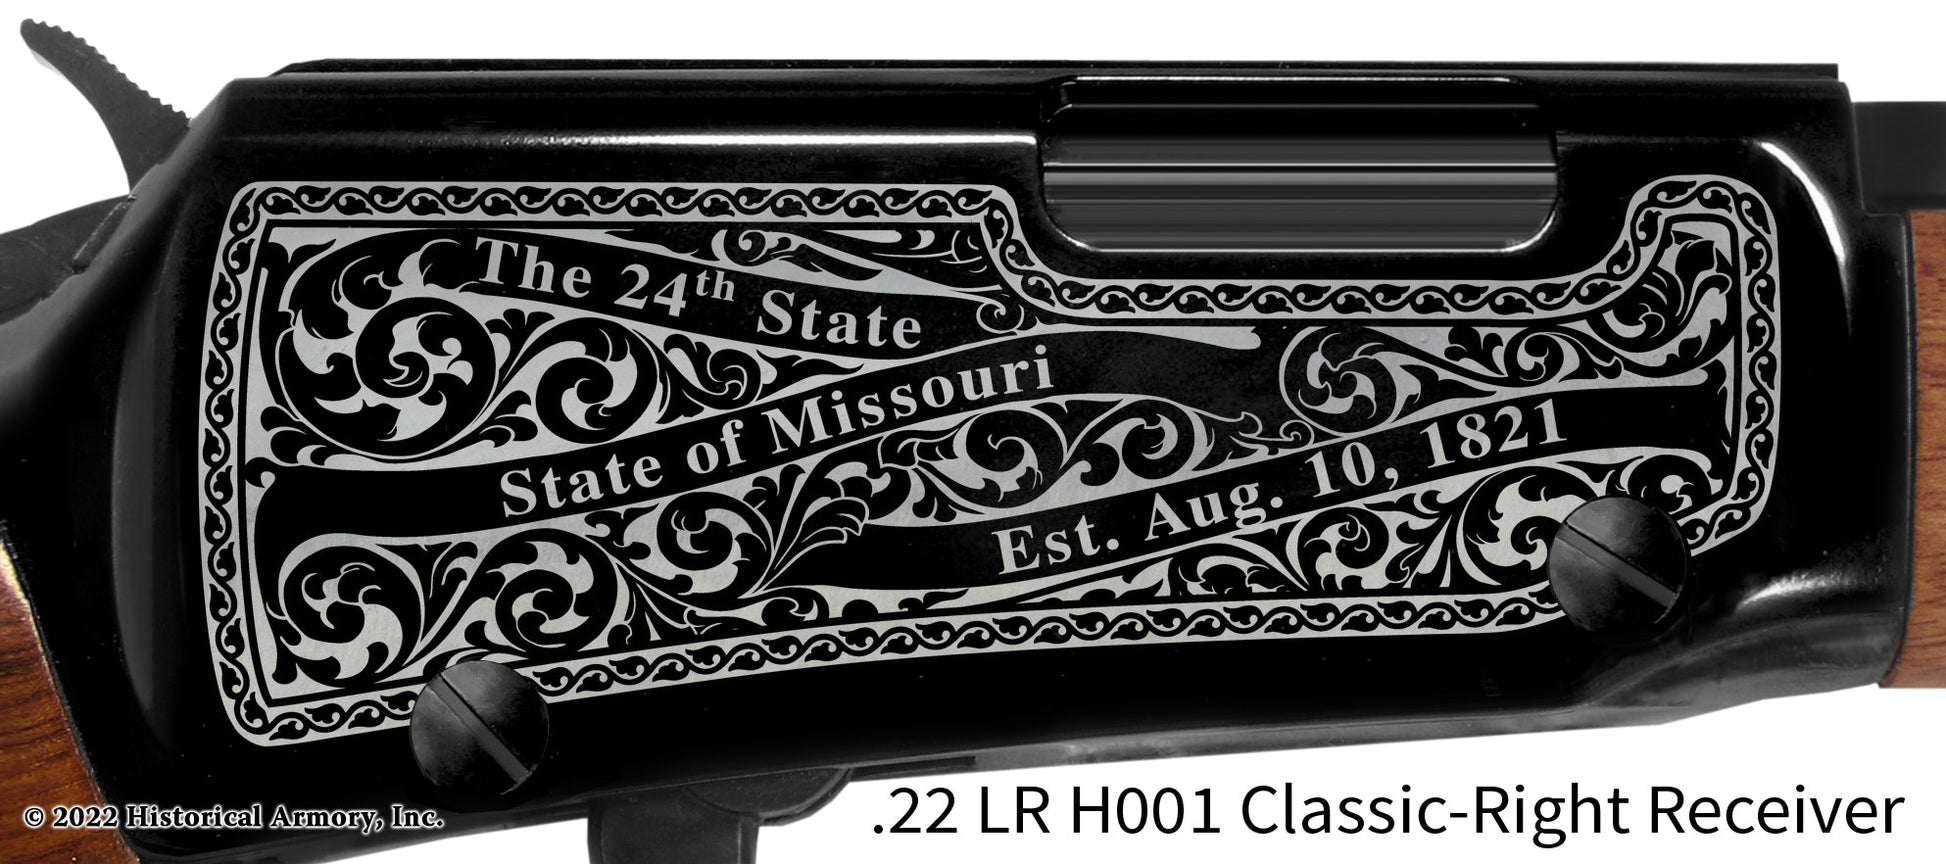 Callaway County Missouri Engraved Henry H001 Rifle